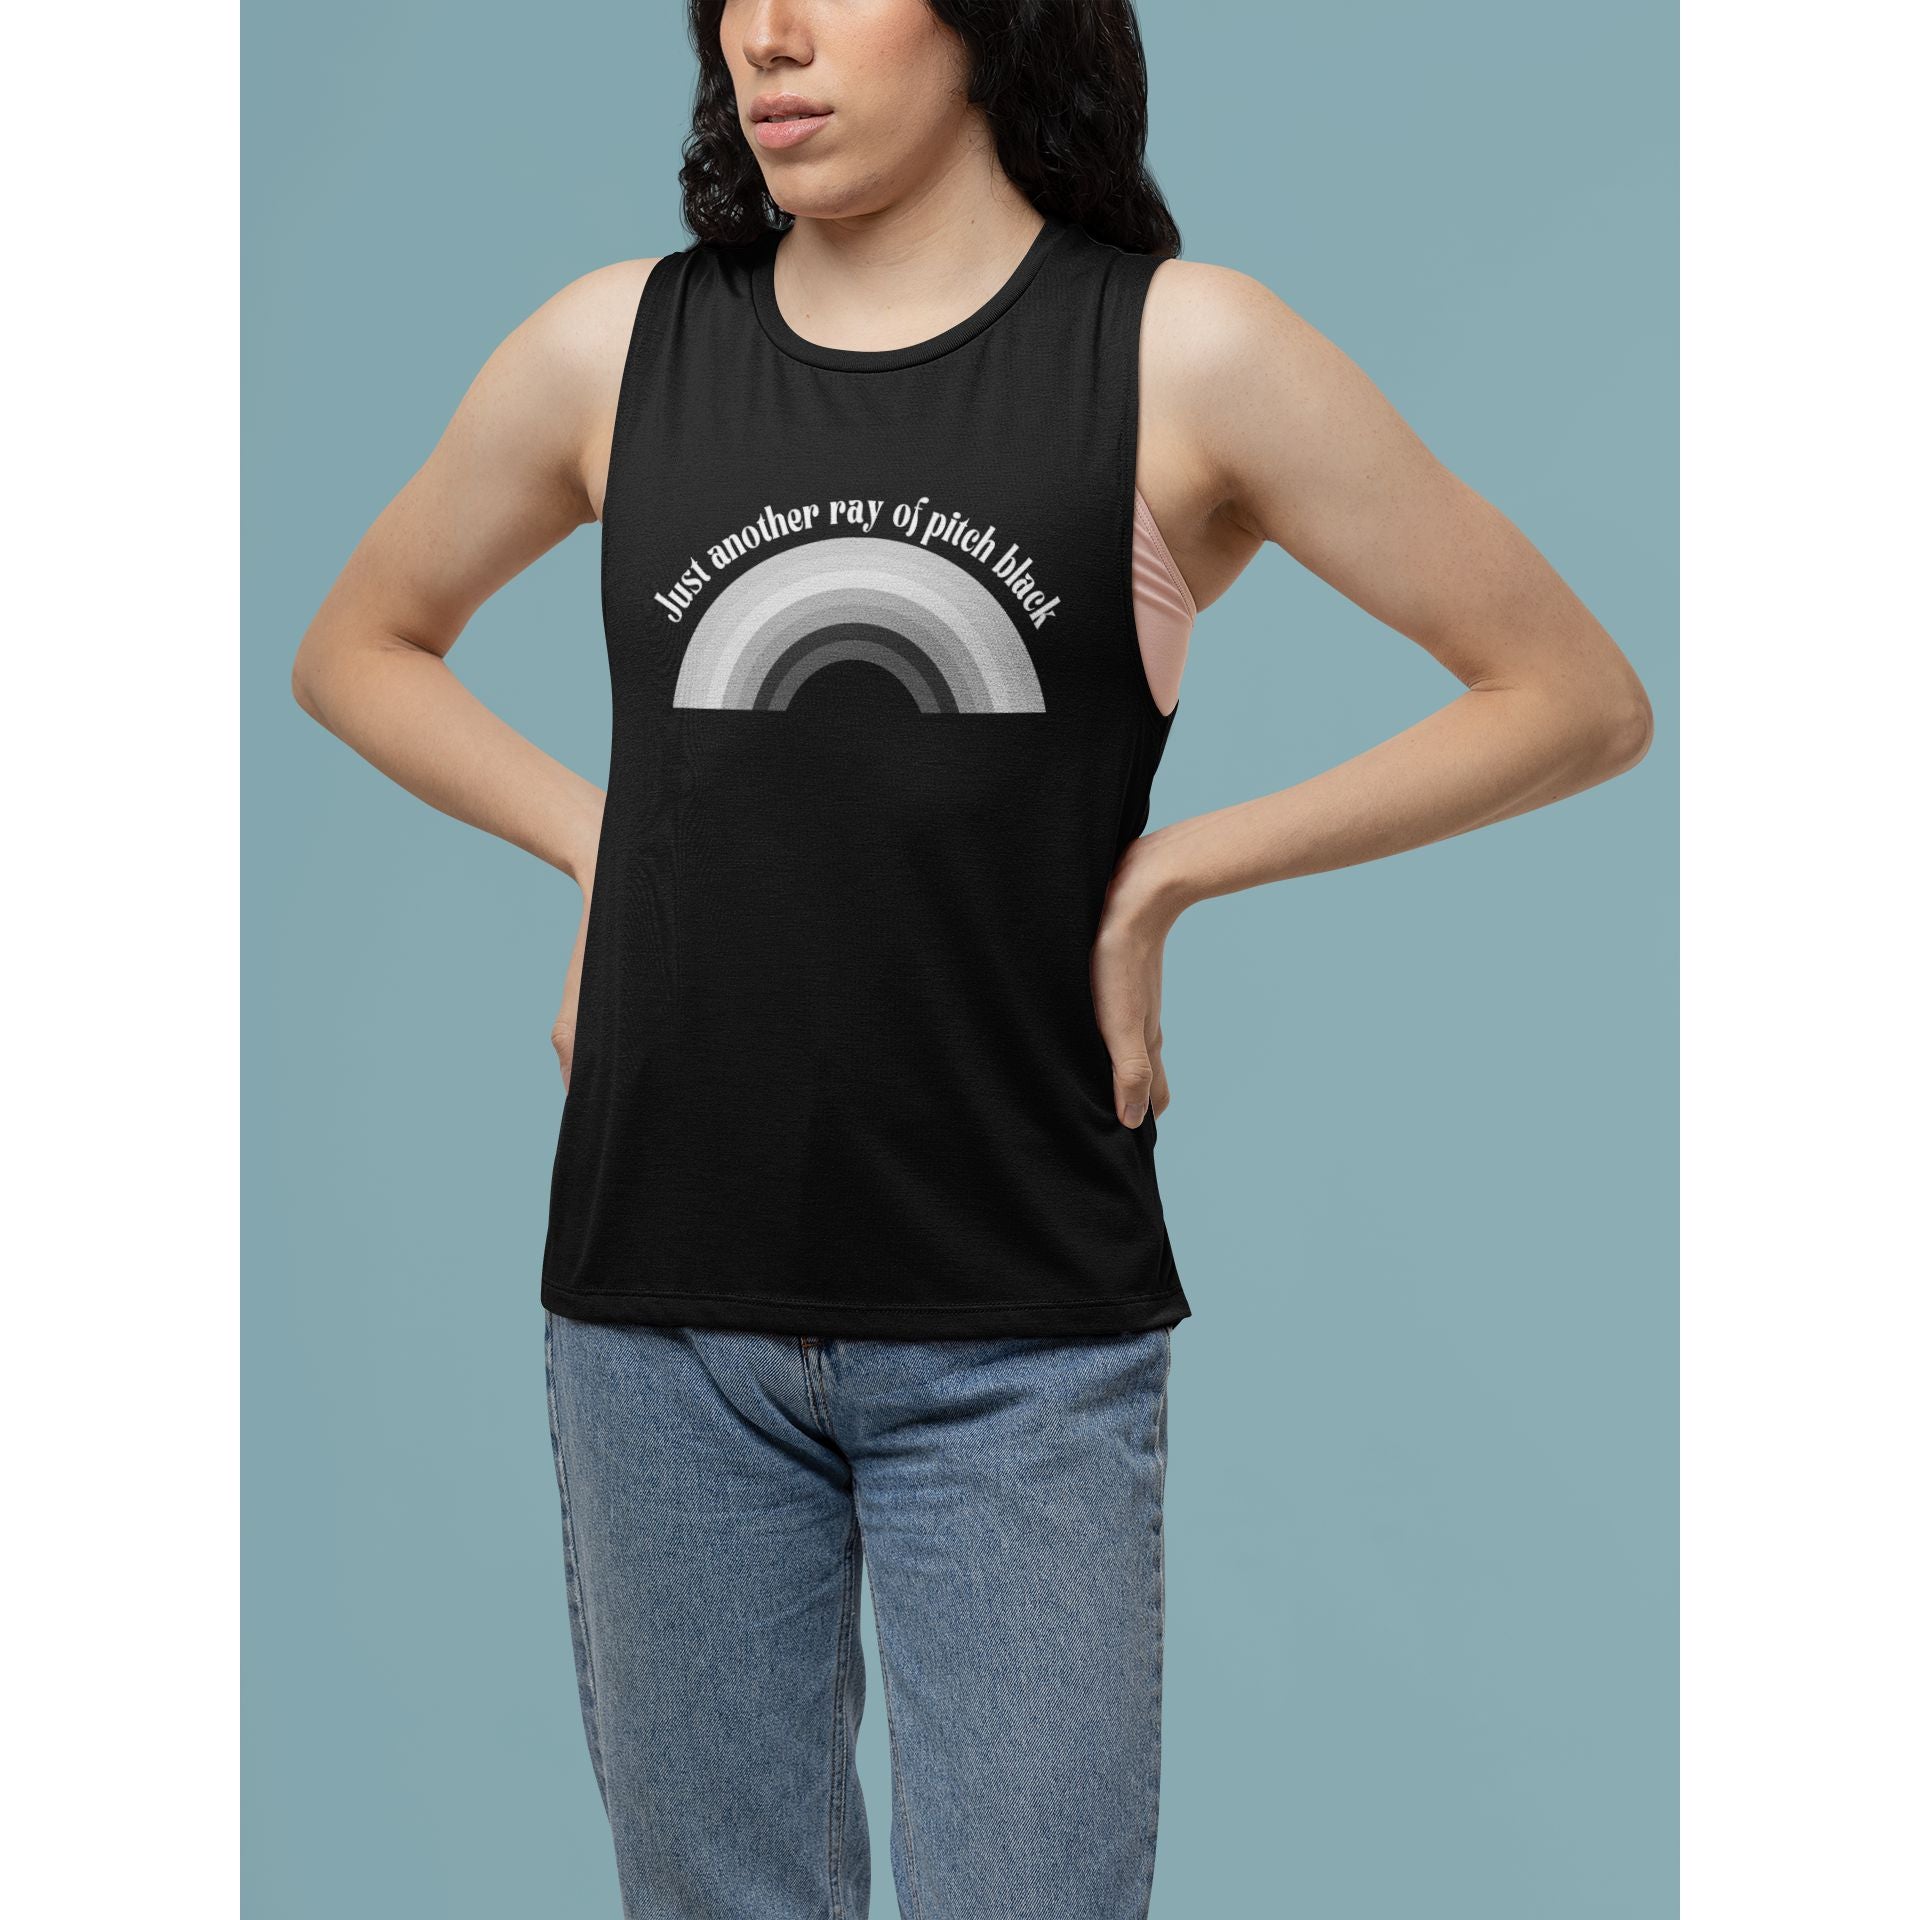 Just Another Ray of Pitch Black Flowy Scoop Muscle Tank